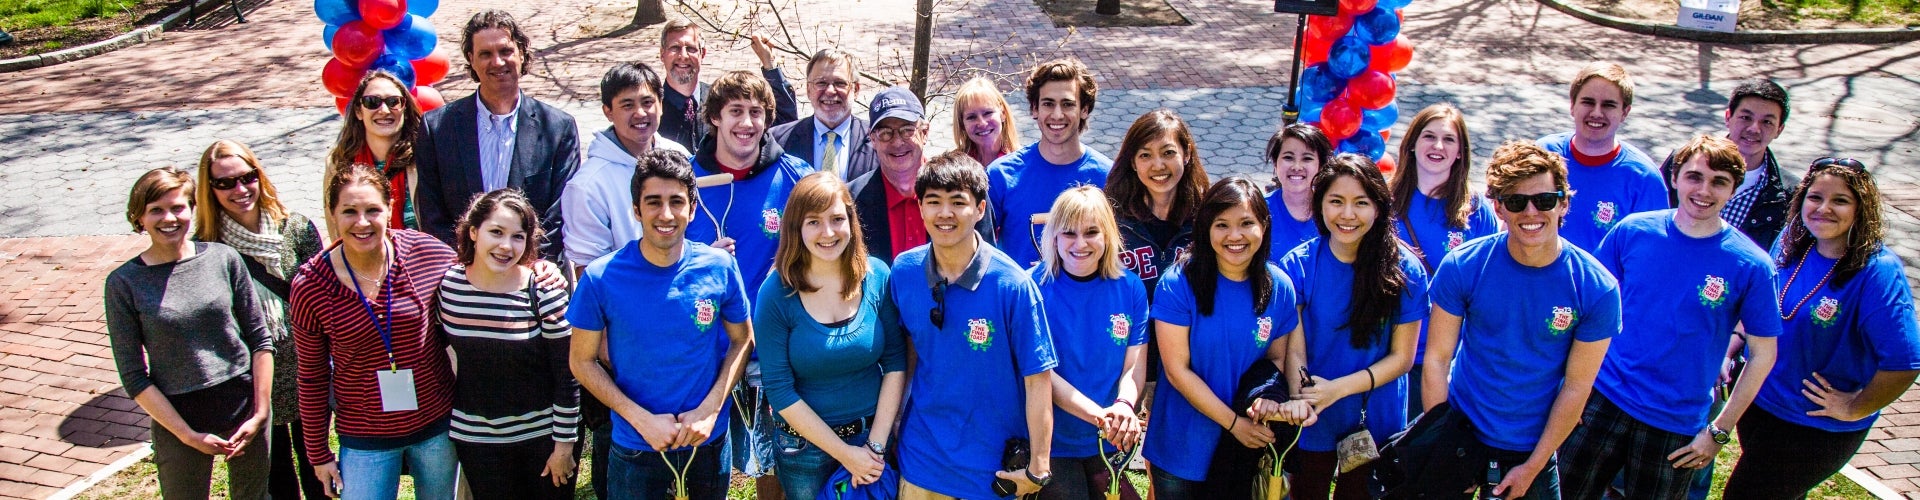 A large group of University of Pennsylvania students smiling and wearing blue t-shirts. 